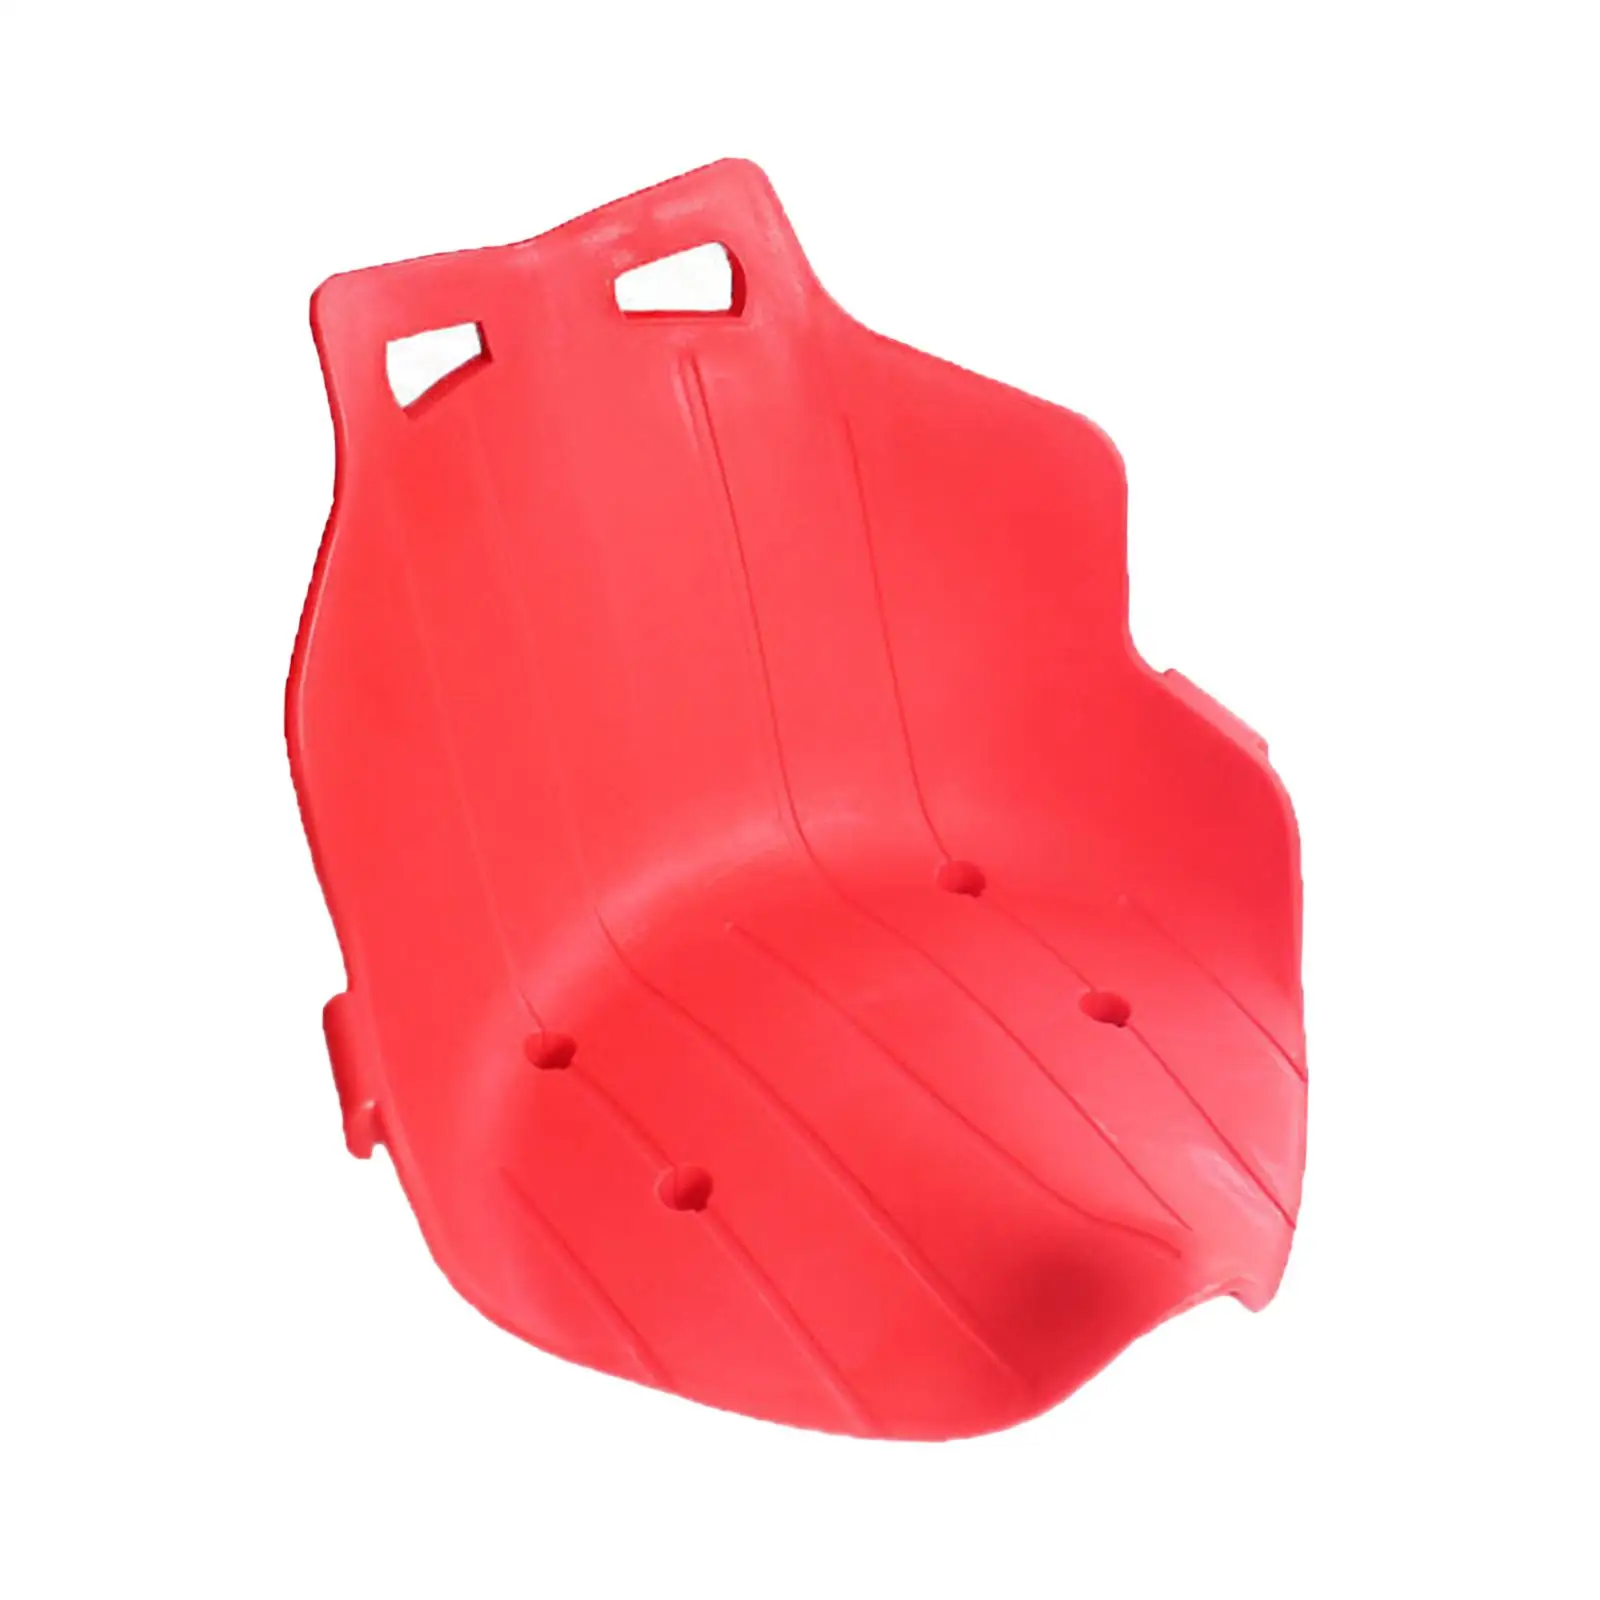 Kids Seat Accessories, Durable for Cart Cart Seat Saddle DIY Go Kart Seat Saddle Trikes Seat Saddle